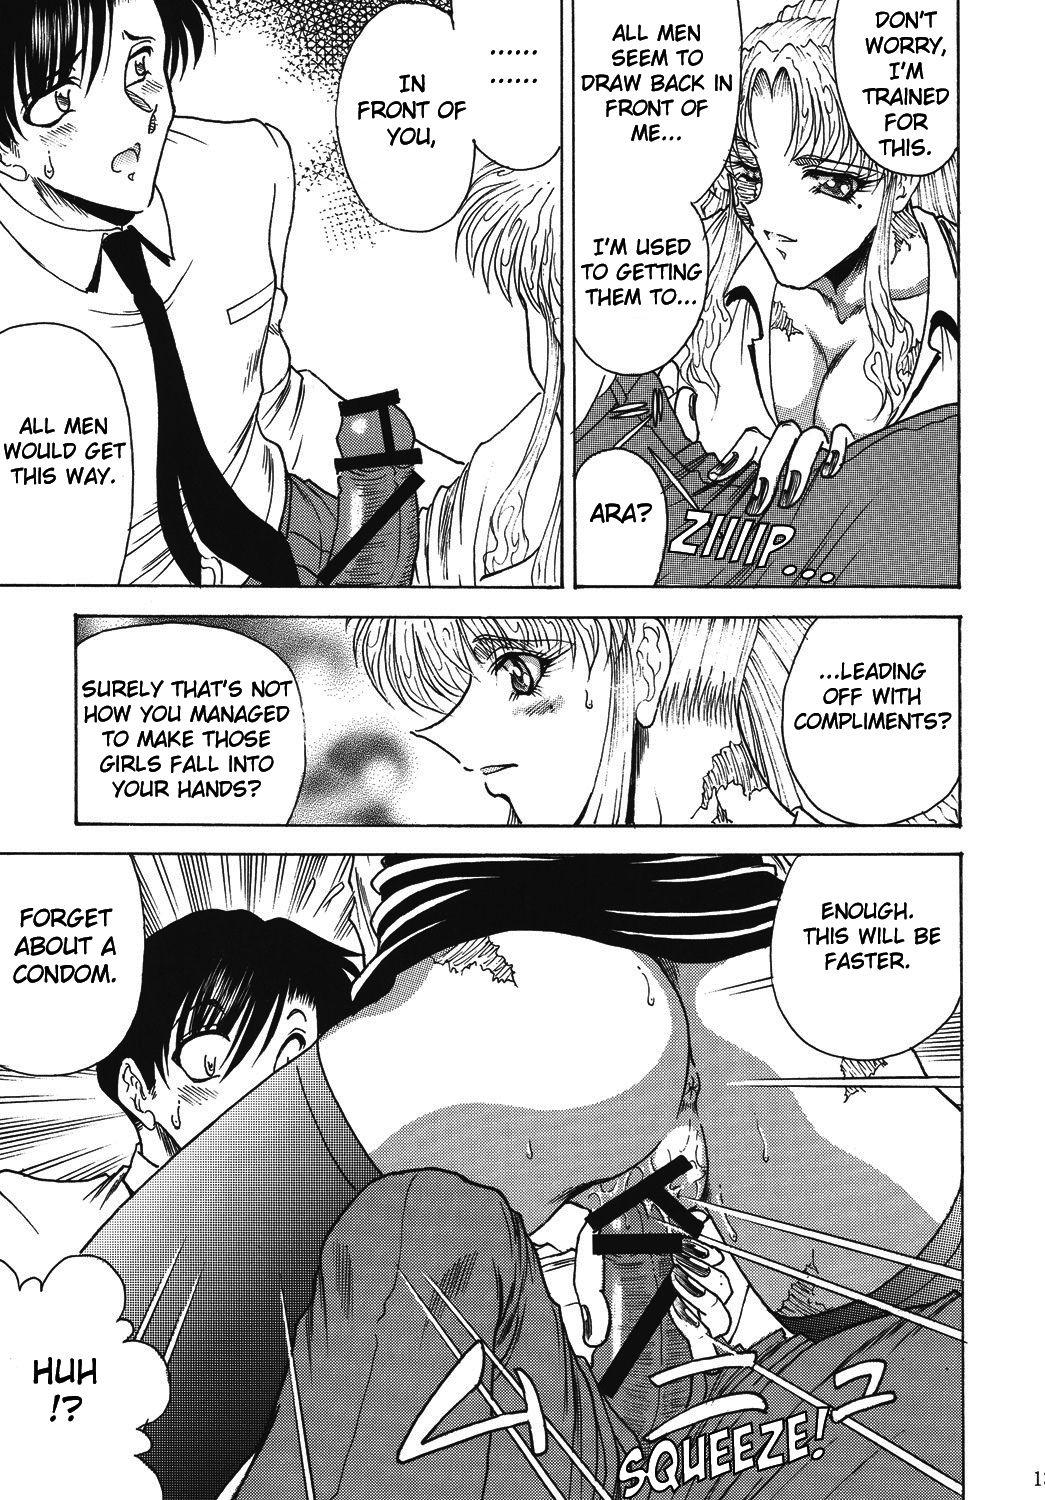 Wank ZONE 39 From Rossia With Love - Black lagoon Oriental - Page 12